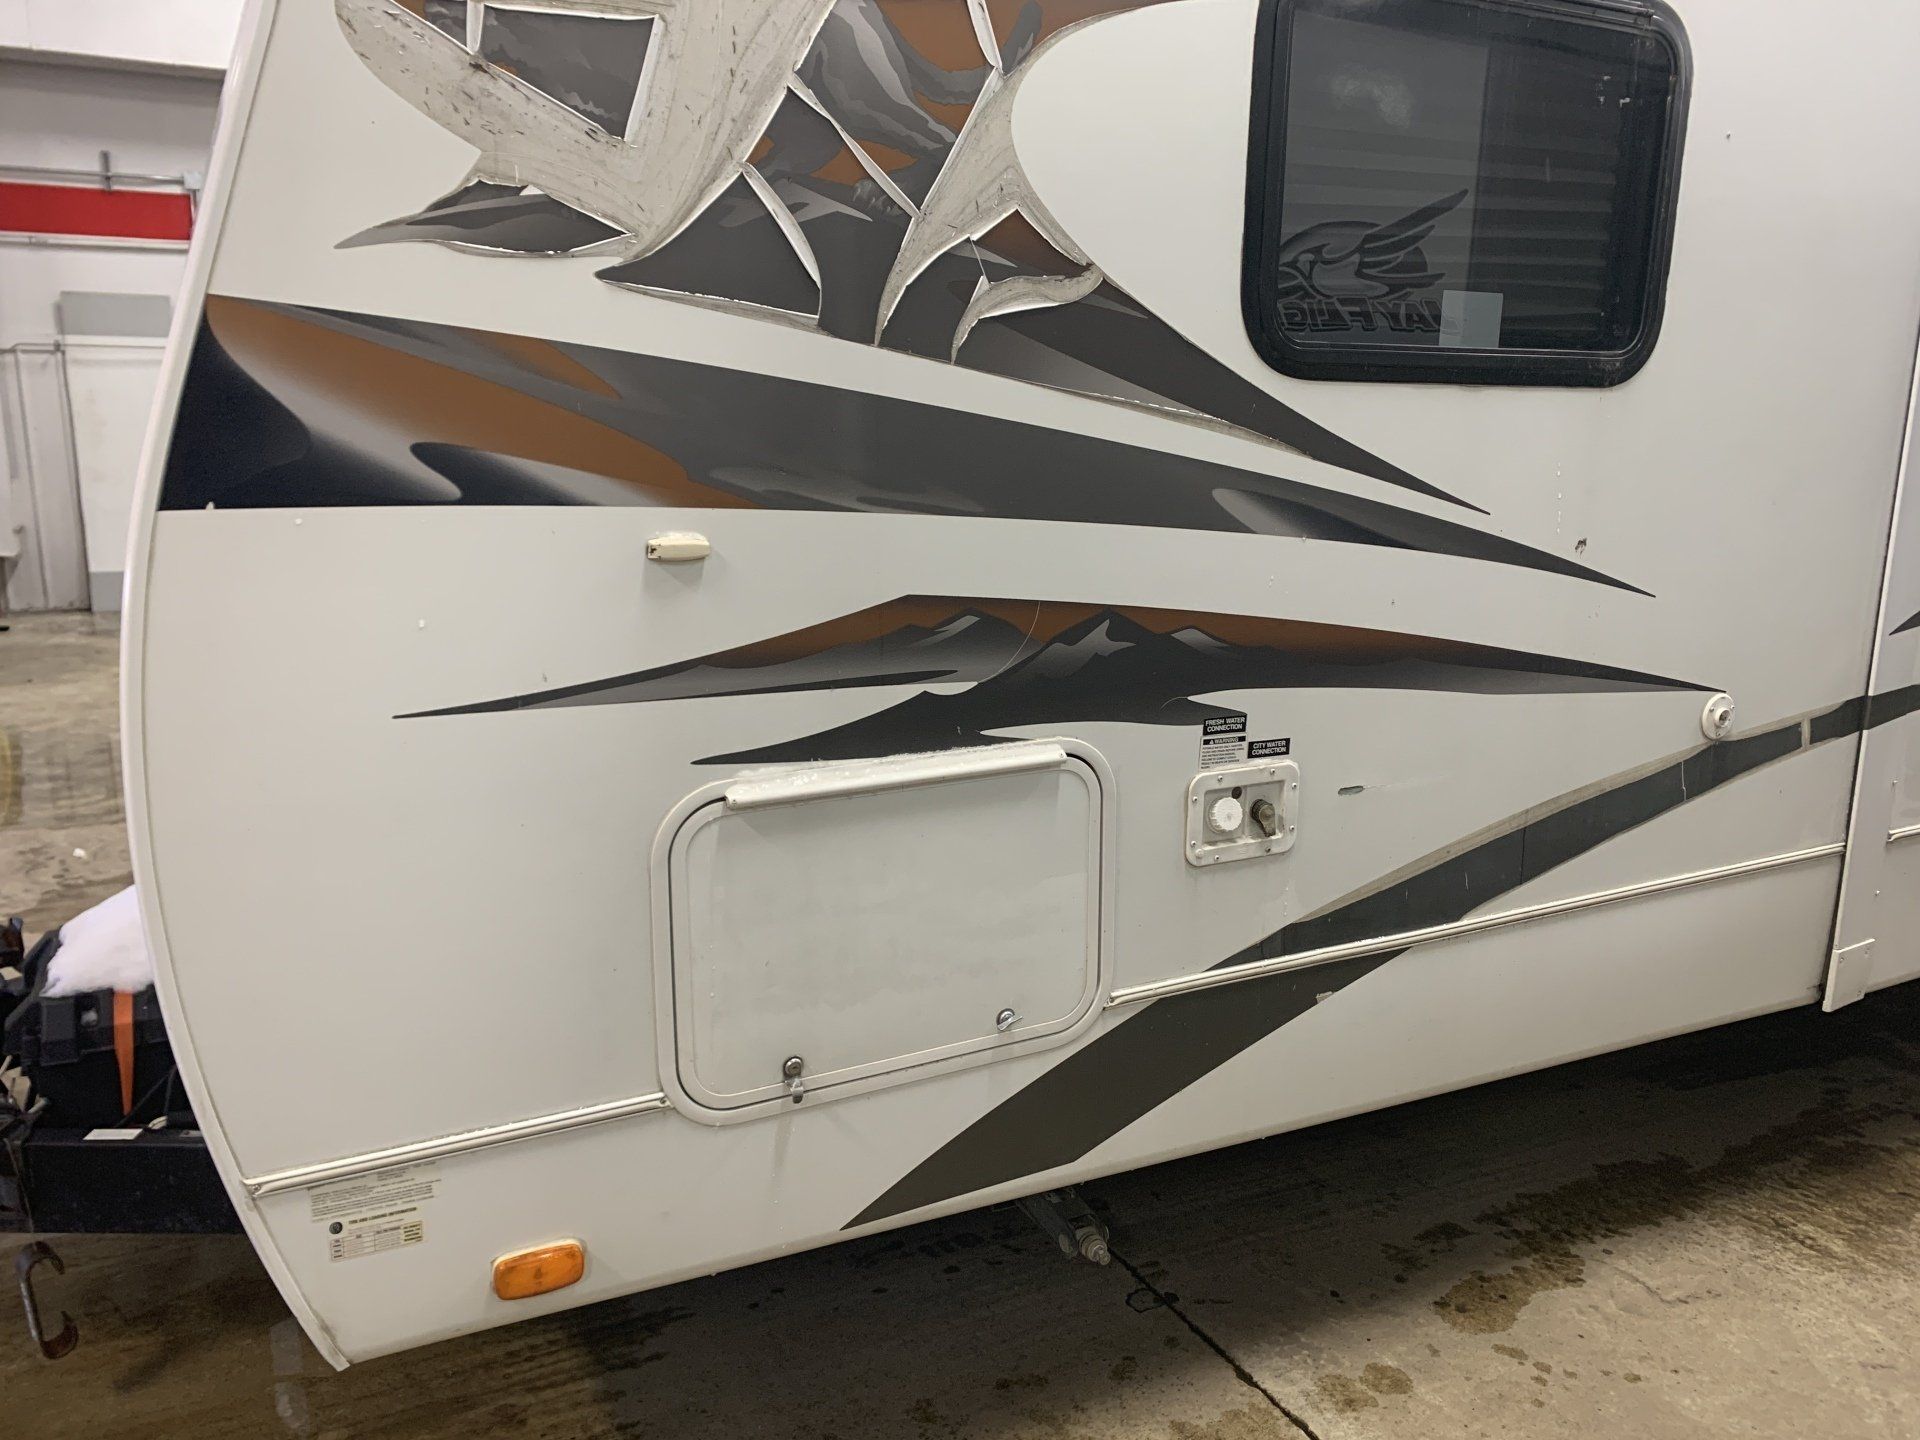 2020 - Alberta's Worst RV Decal Contest - Grand Prize Winner - Before & After - Pic 18